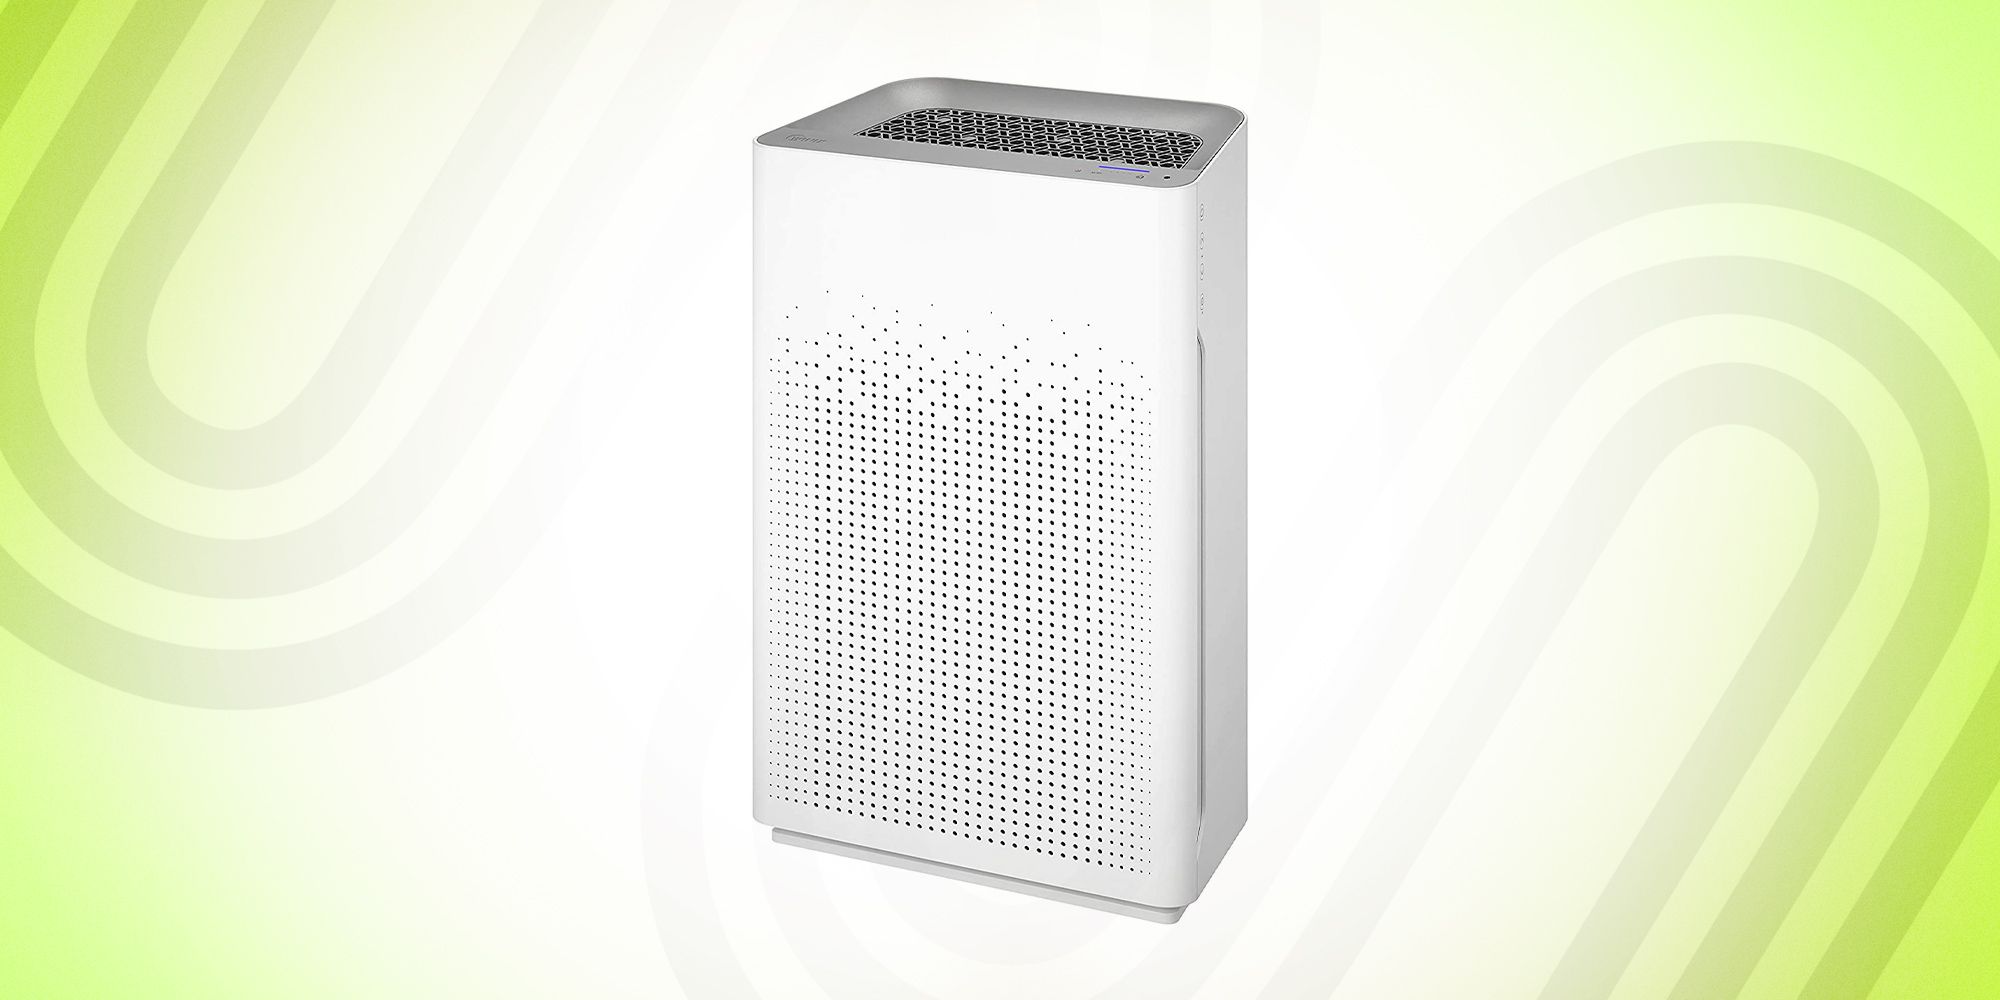 The 8 Best Air Purifiers in 2022 - Recommended Air Purifiers